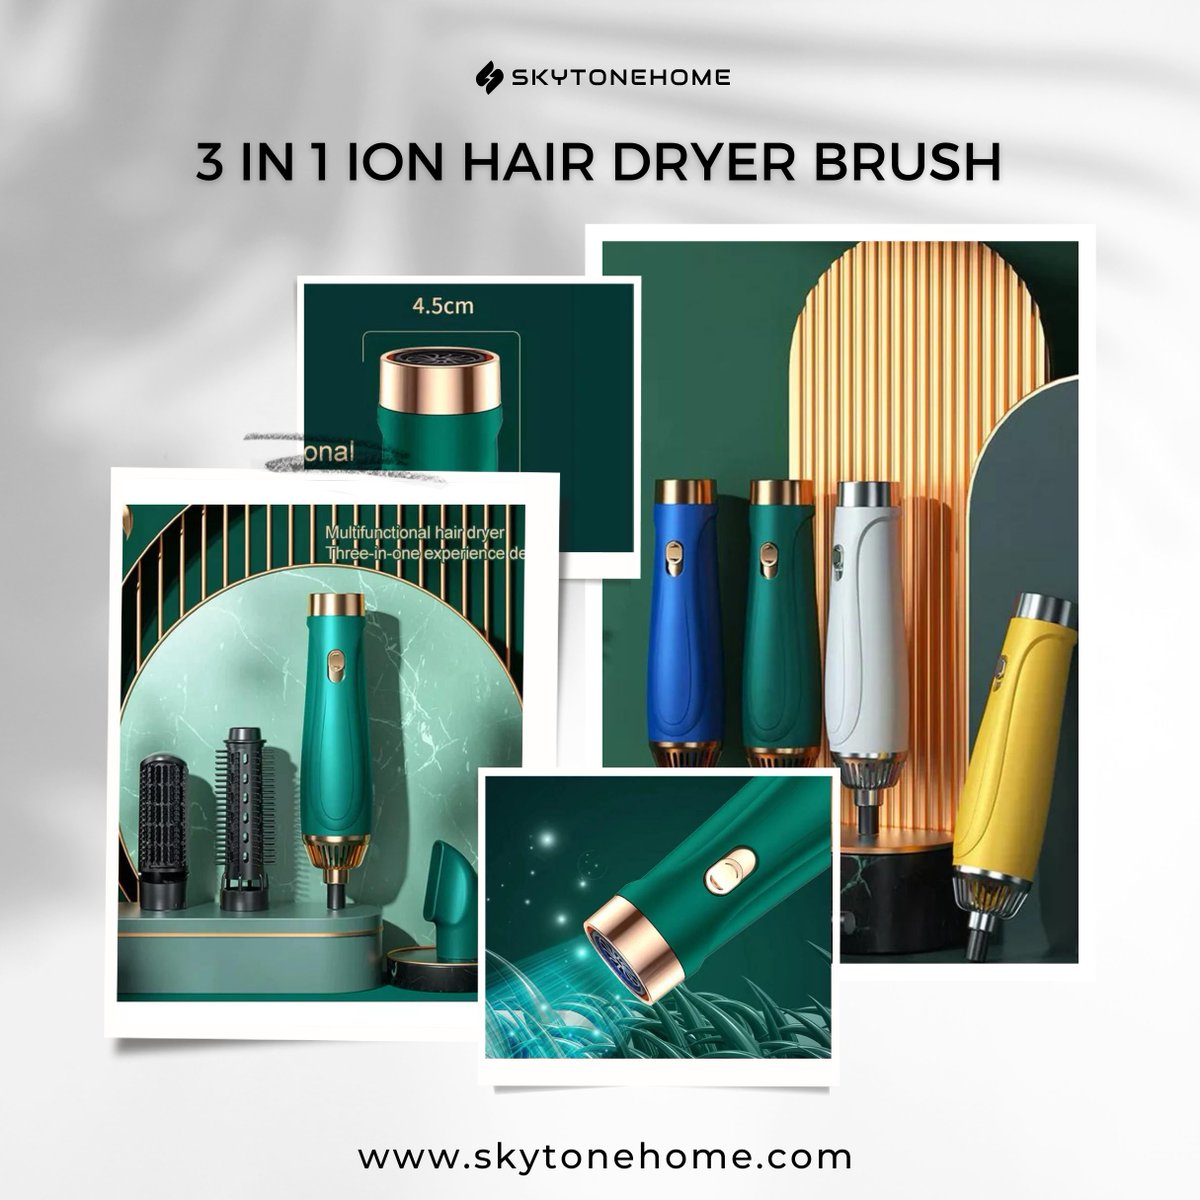 SKYTONE 3 In 1 Ion Hair Dryer Brush

#doublenegativeiontechnology #powerfulhairdryer #smarttemperaturecontrol #salonqualityblowouts #haircare #moisturebalancedualionsystem #innovativefanblades #efficientairflow #protectivehairdrying #healthyhair #skytonehome